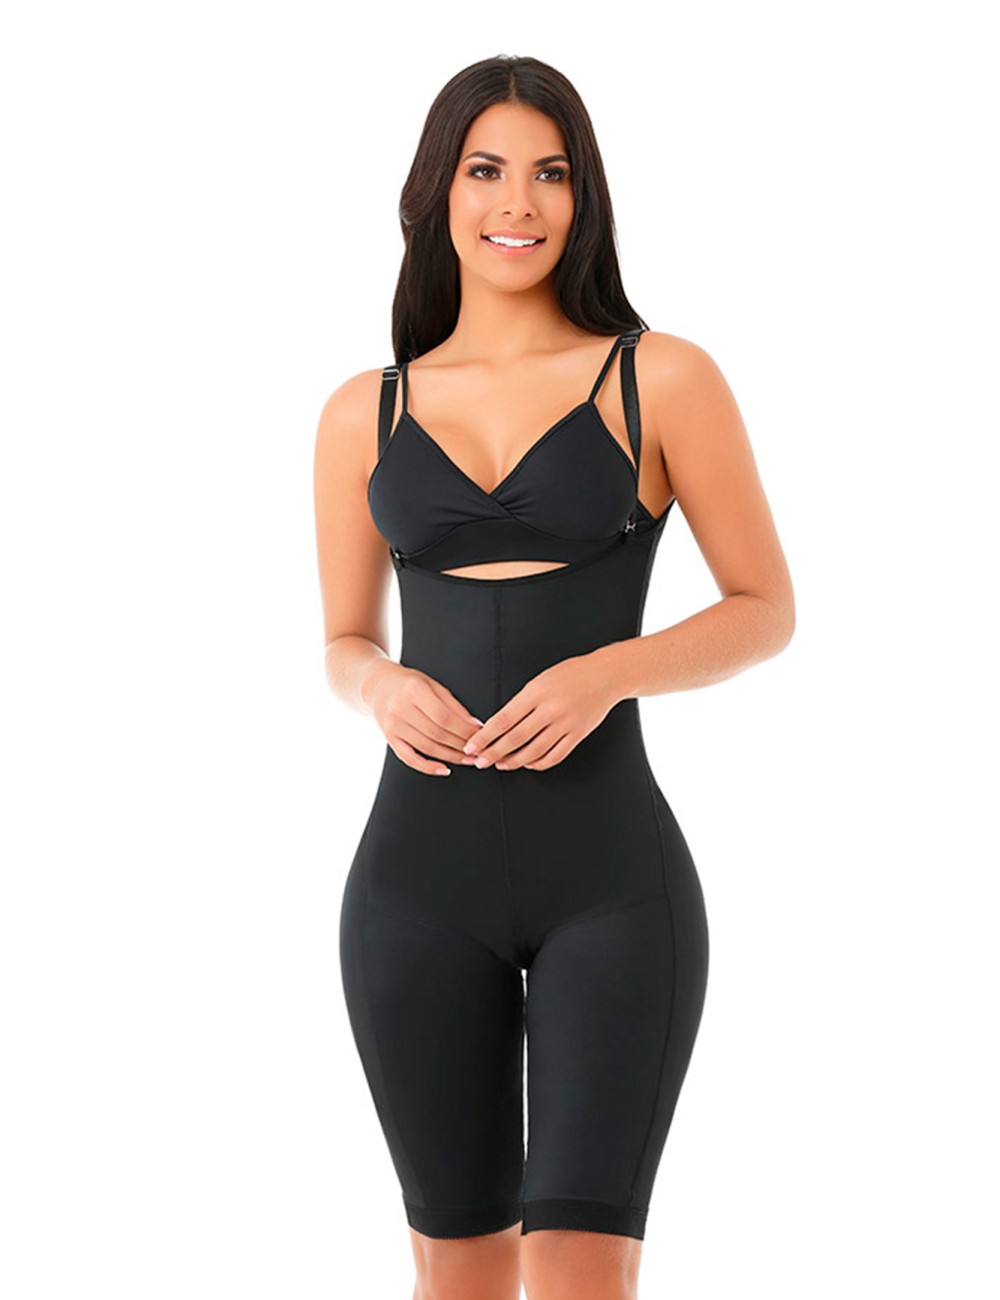 generic Compression Garments Adjustable Three-Row Hook Attached